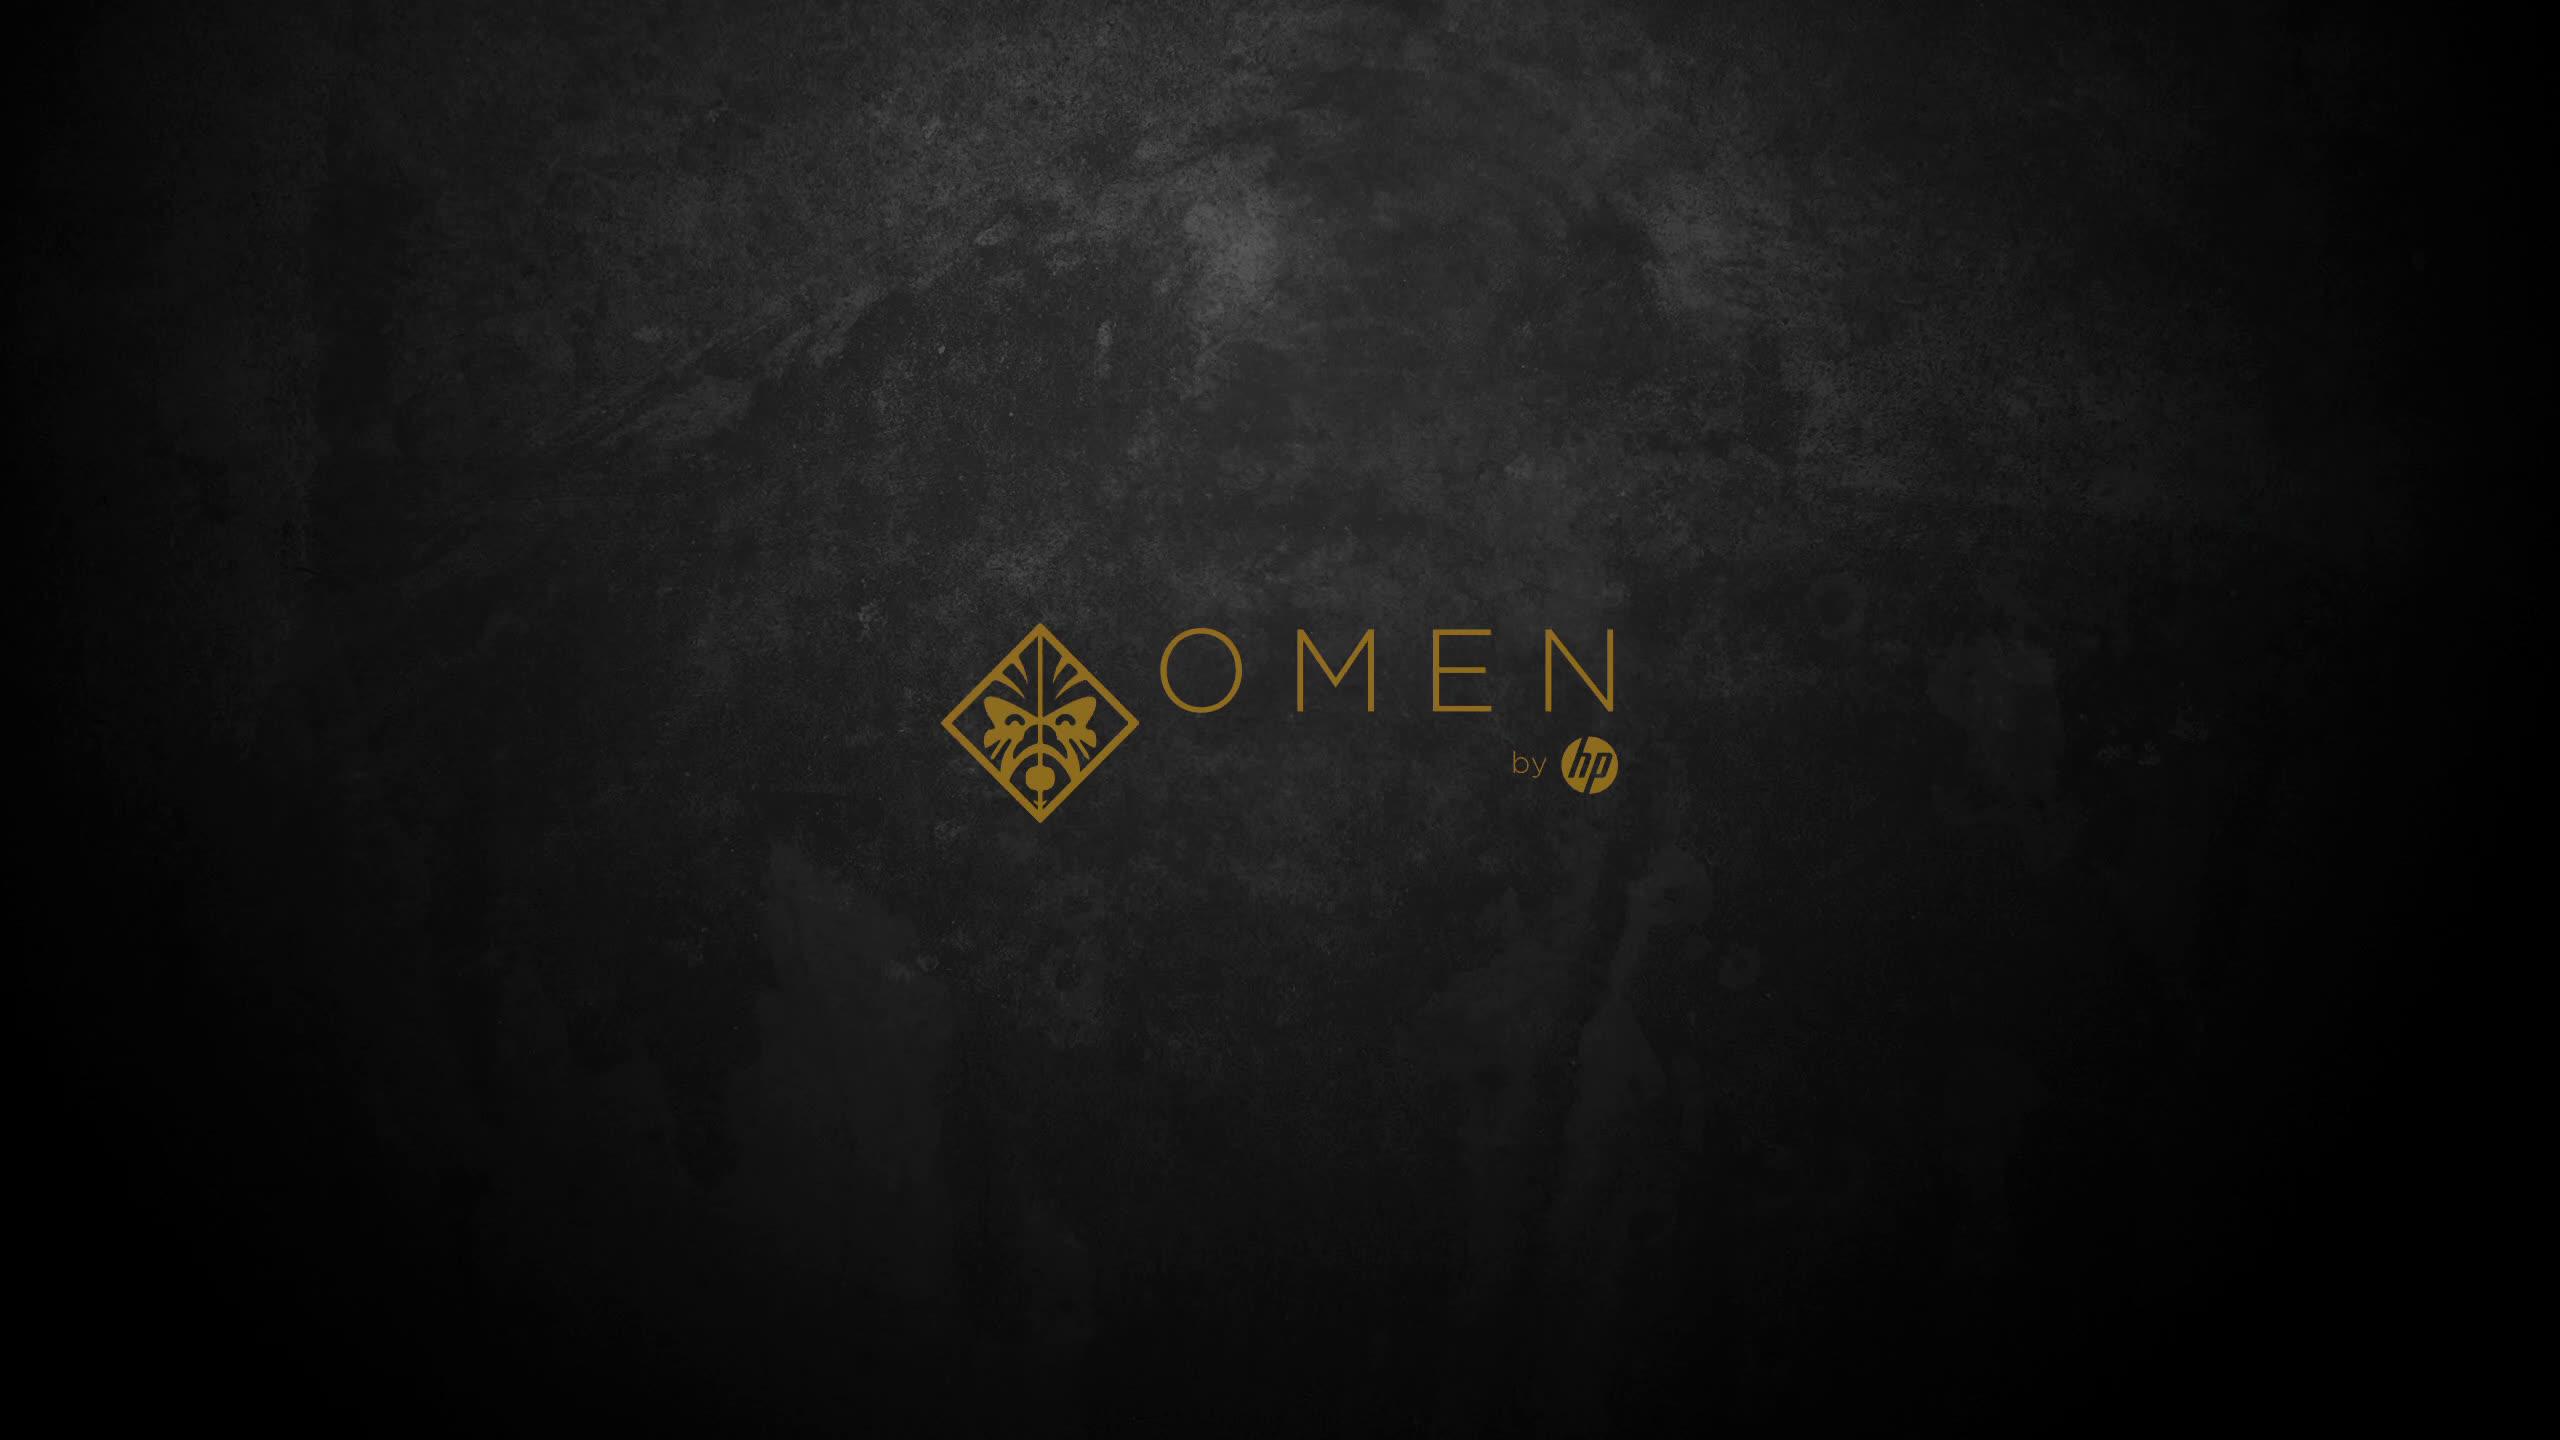 Omen HP RGB Animated Live Wallpapers